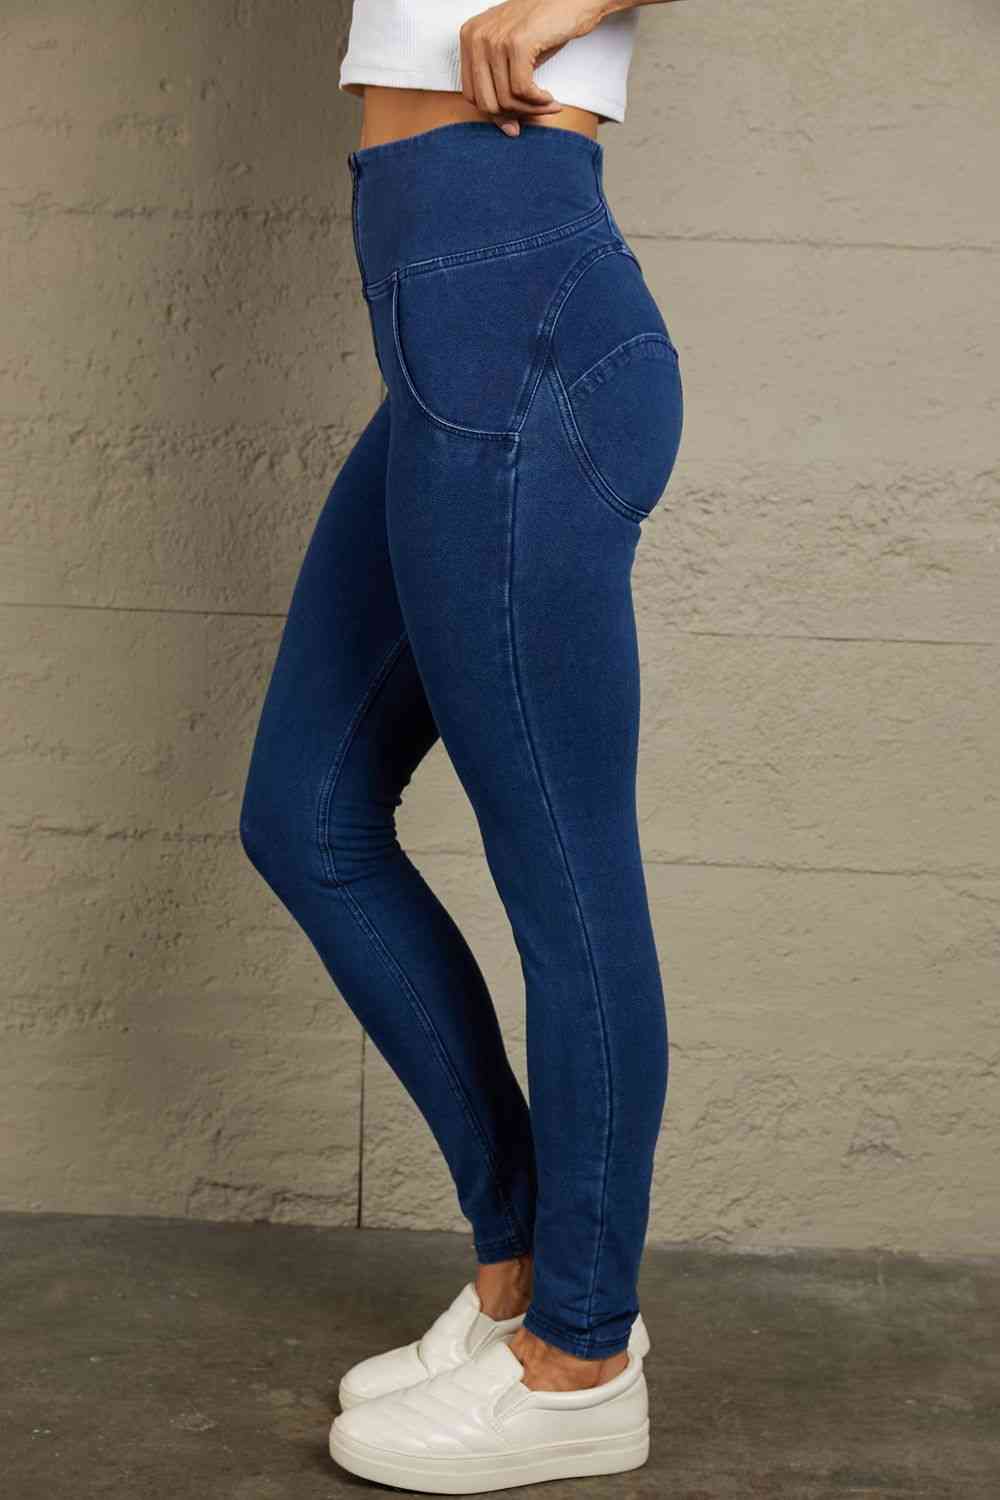 Dim Gray Baeful High Waist Zip Up Skinny Long Jeans Sentient Beauty Fashions Apparel &amp; Accessories